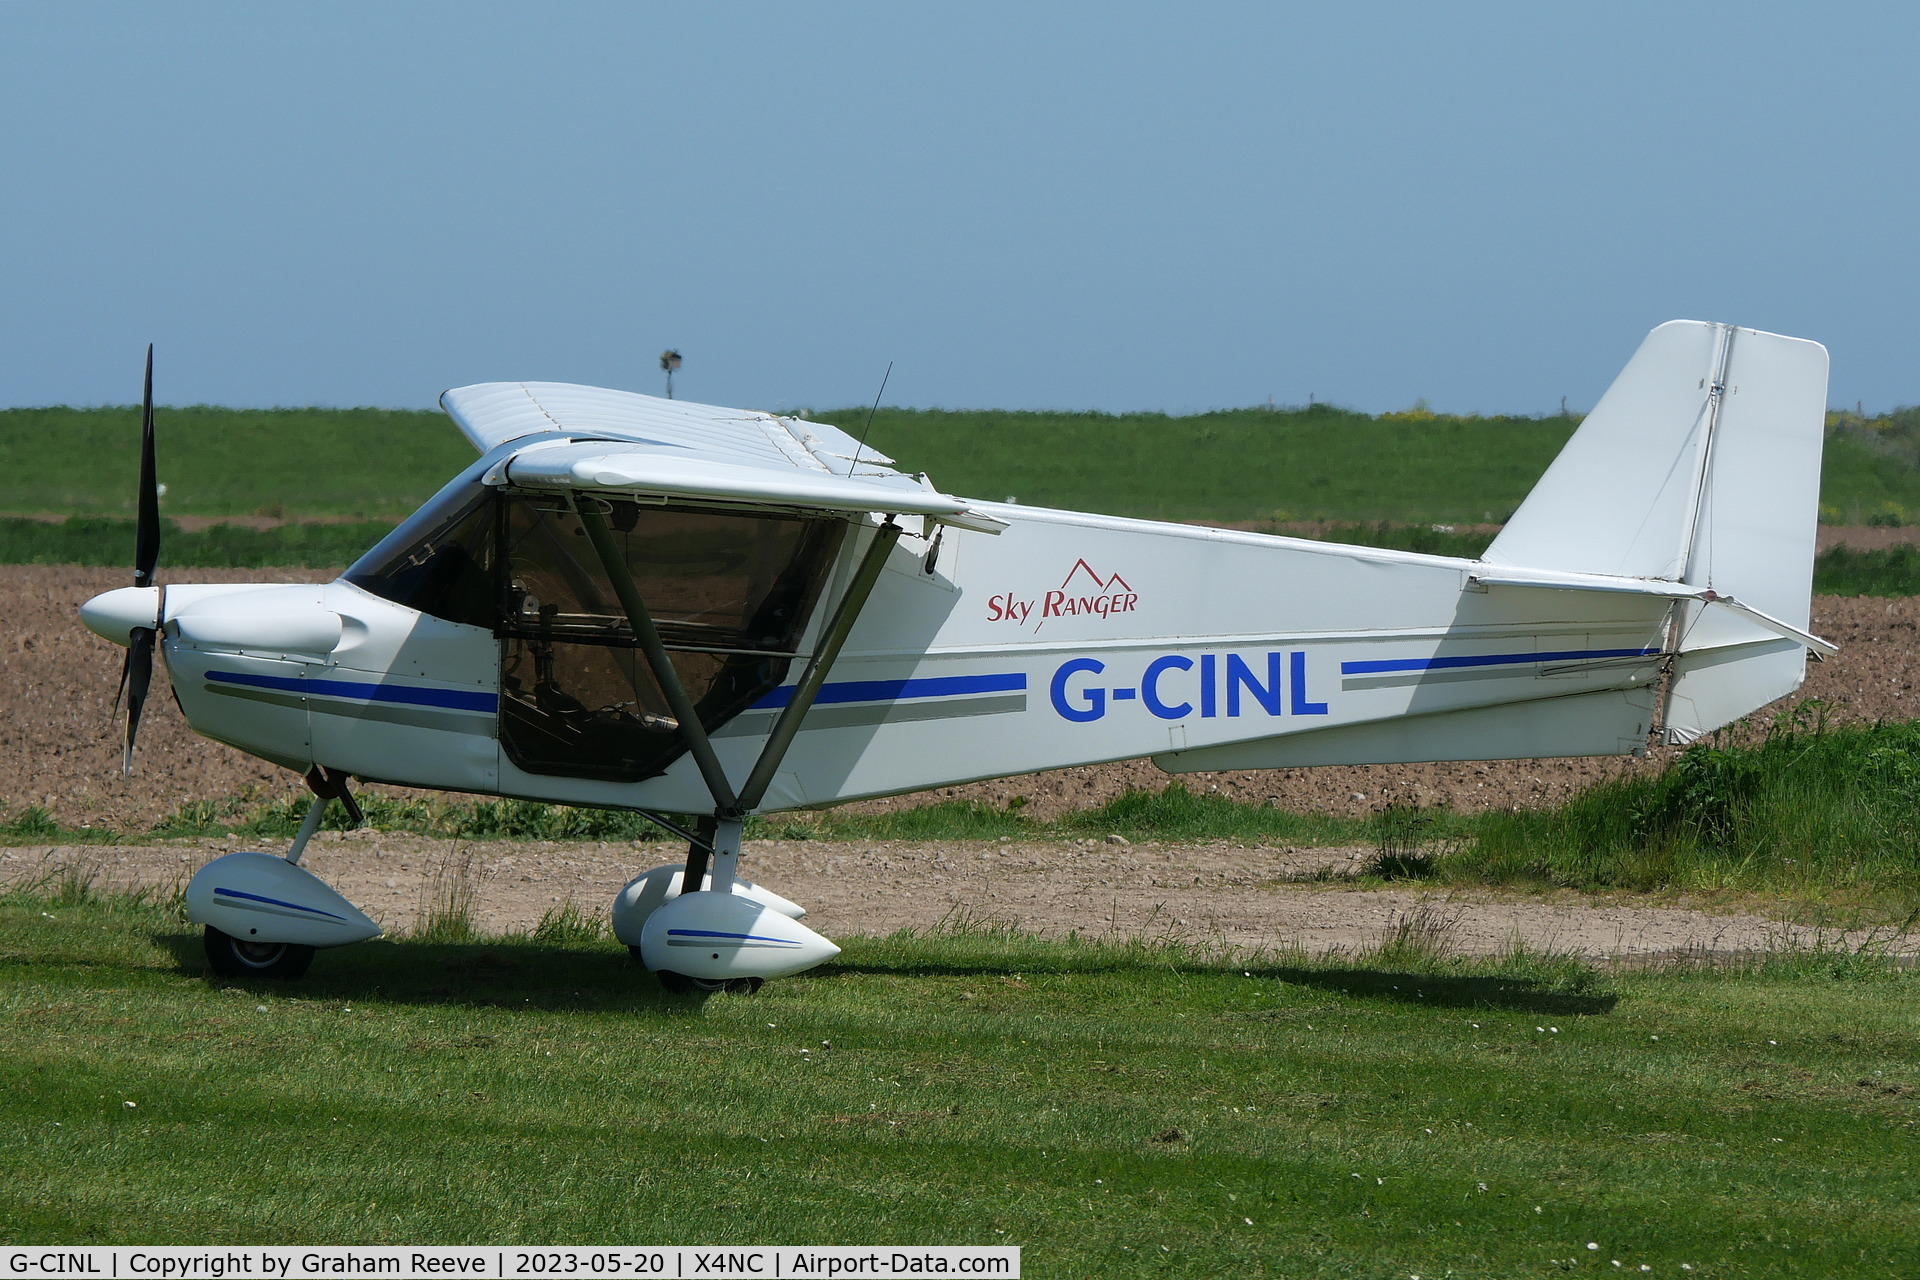 G-CINL, 2015 Skyranger Swift 912S(1) C/N BMAA/HB/647, Parked at North Coates.